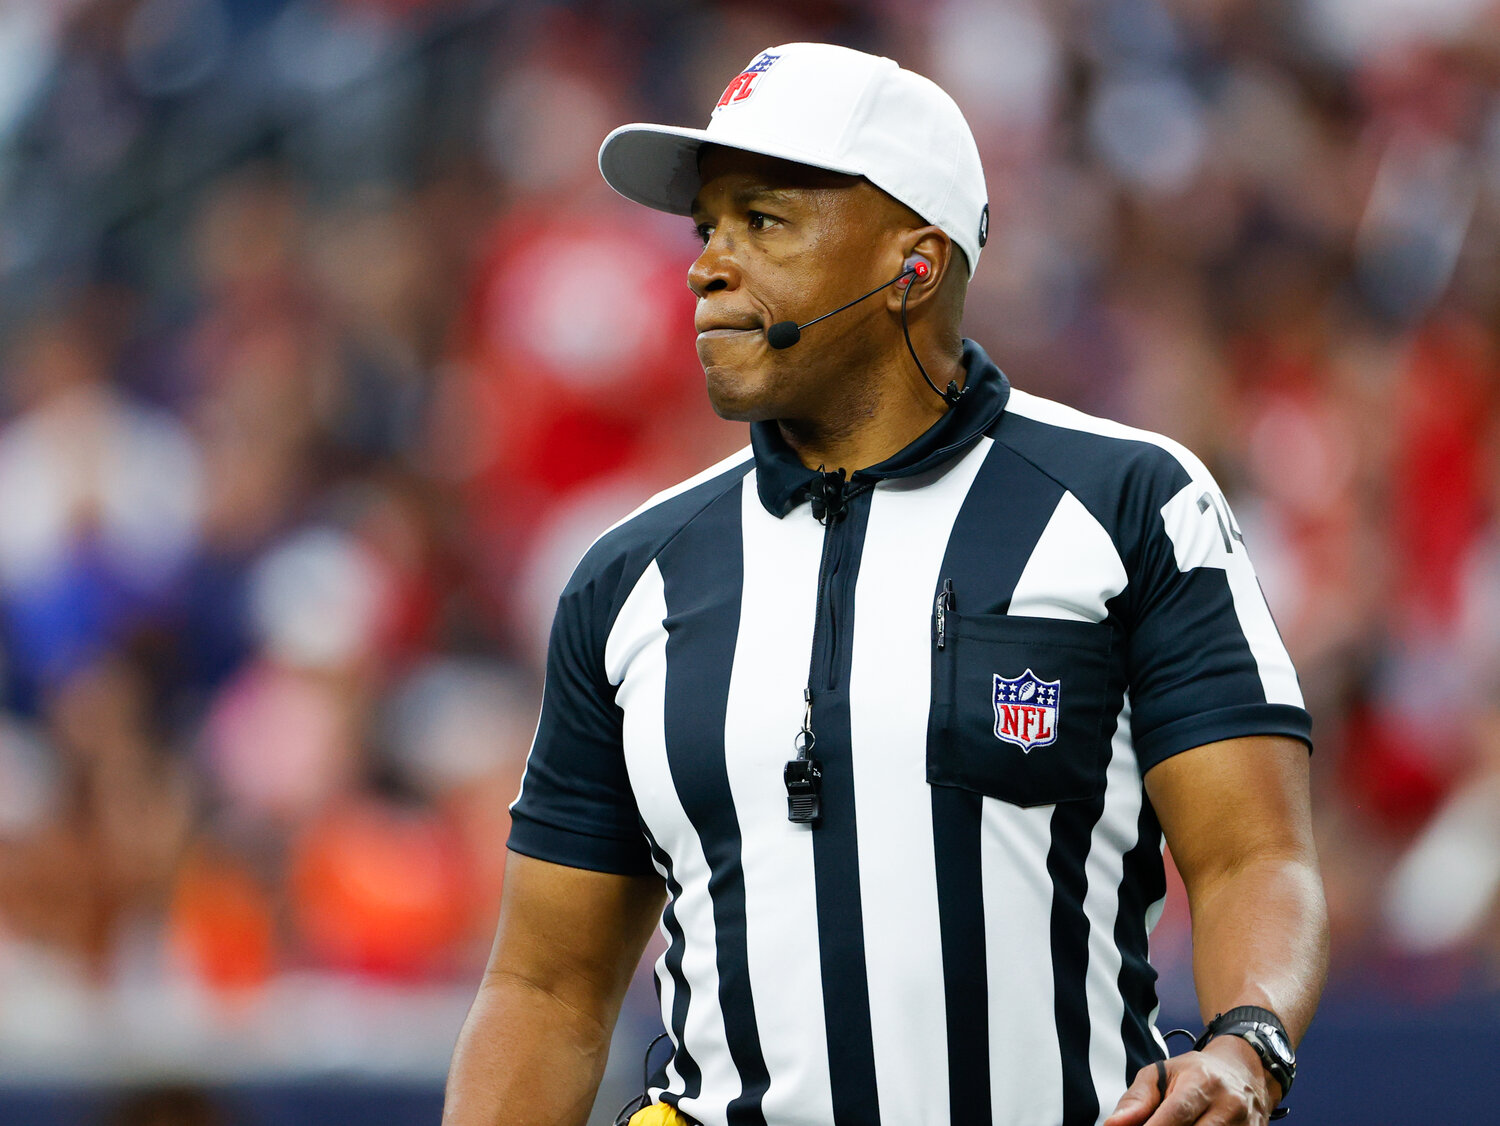 Referee Shawn Smith (14) during an NFL game between the Texans and the Broncos on December 3, 2023 in Houston. The Texans won, 22-17.